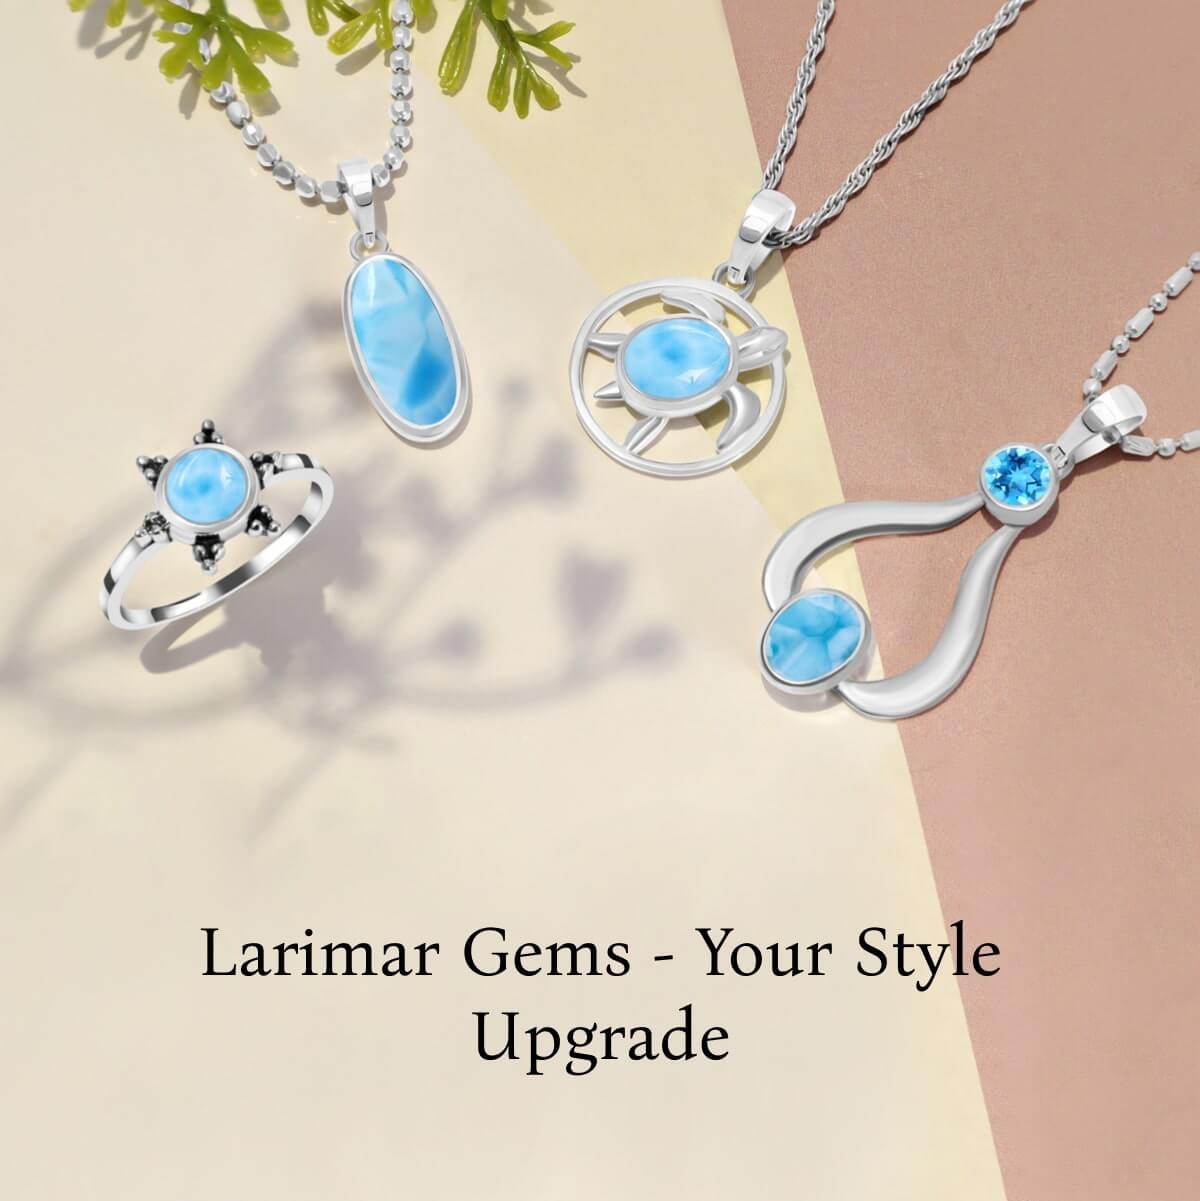 Stylish ideas for wearing the Larimar jewelry